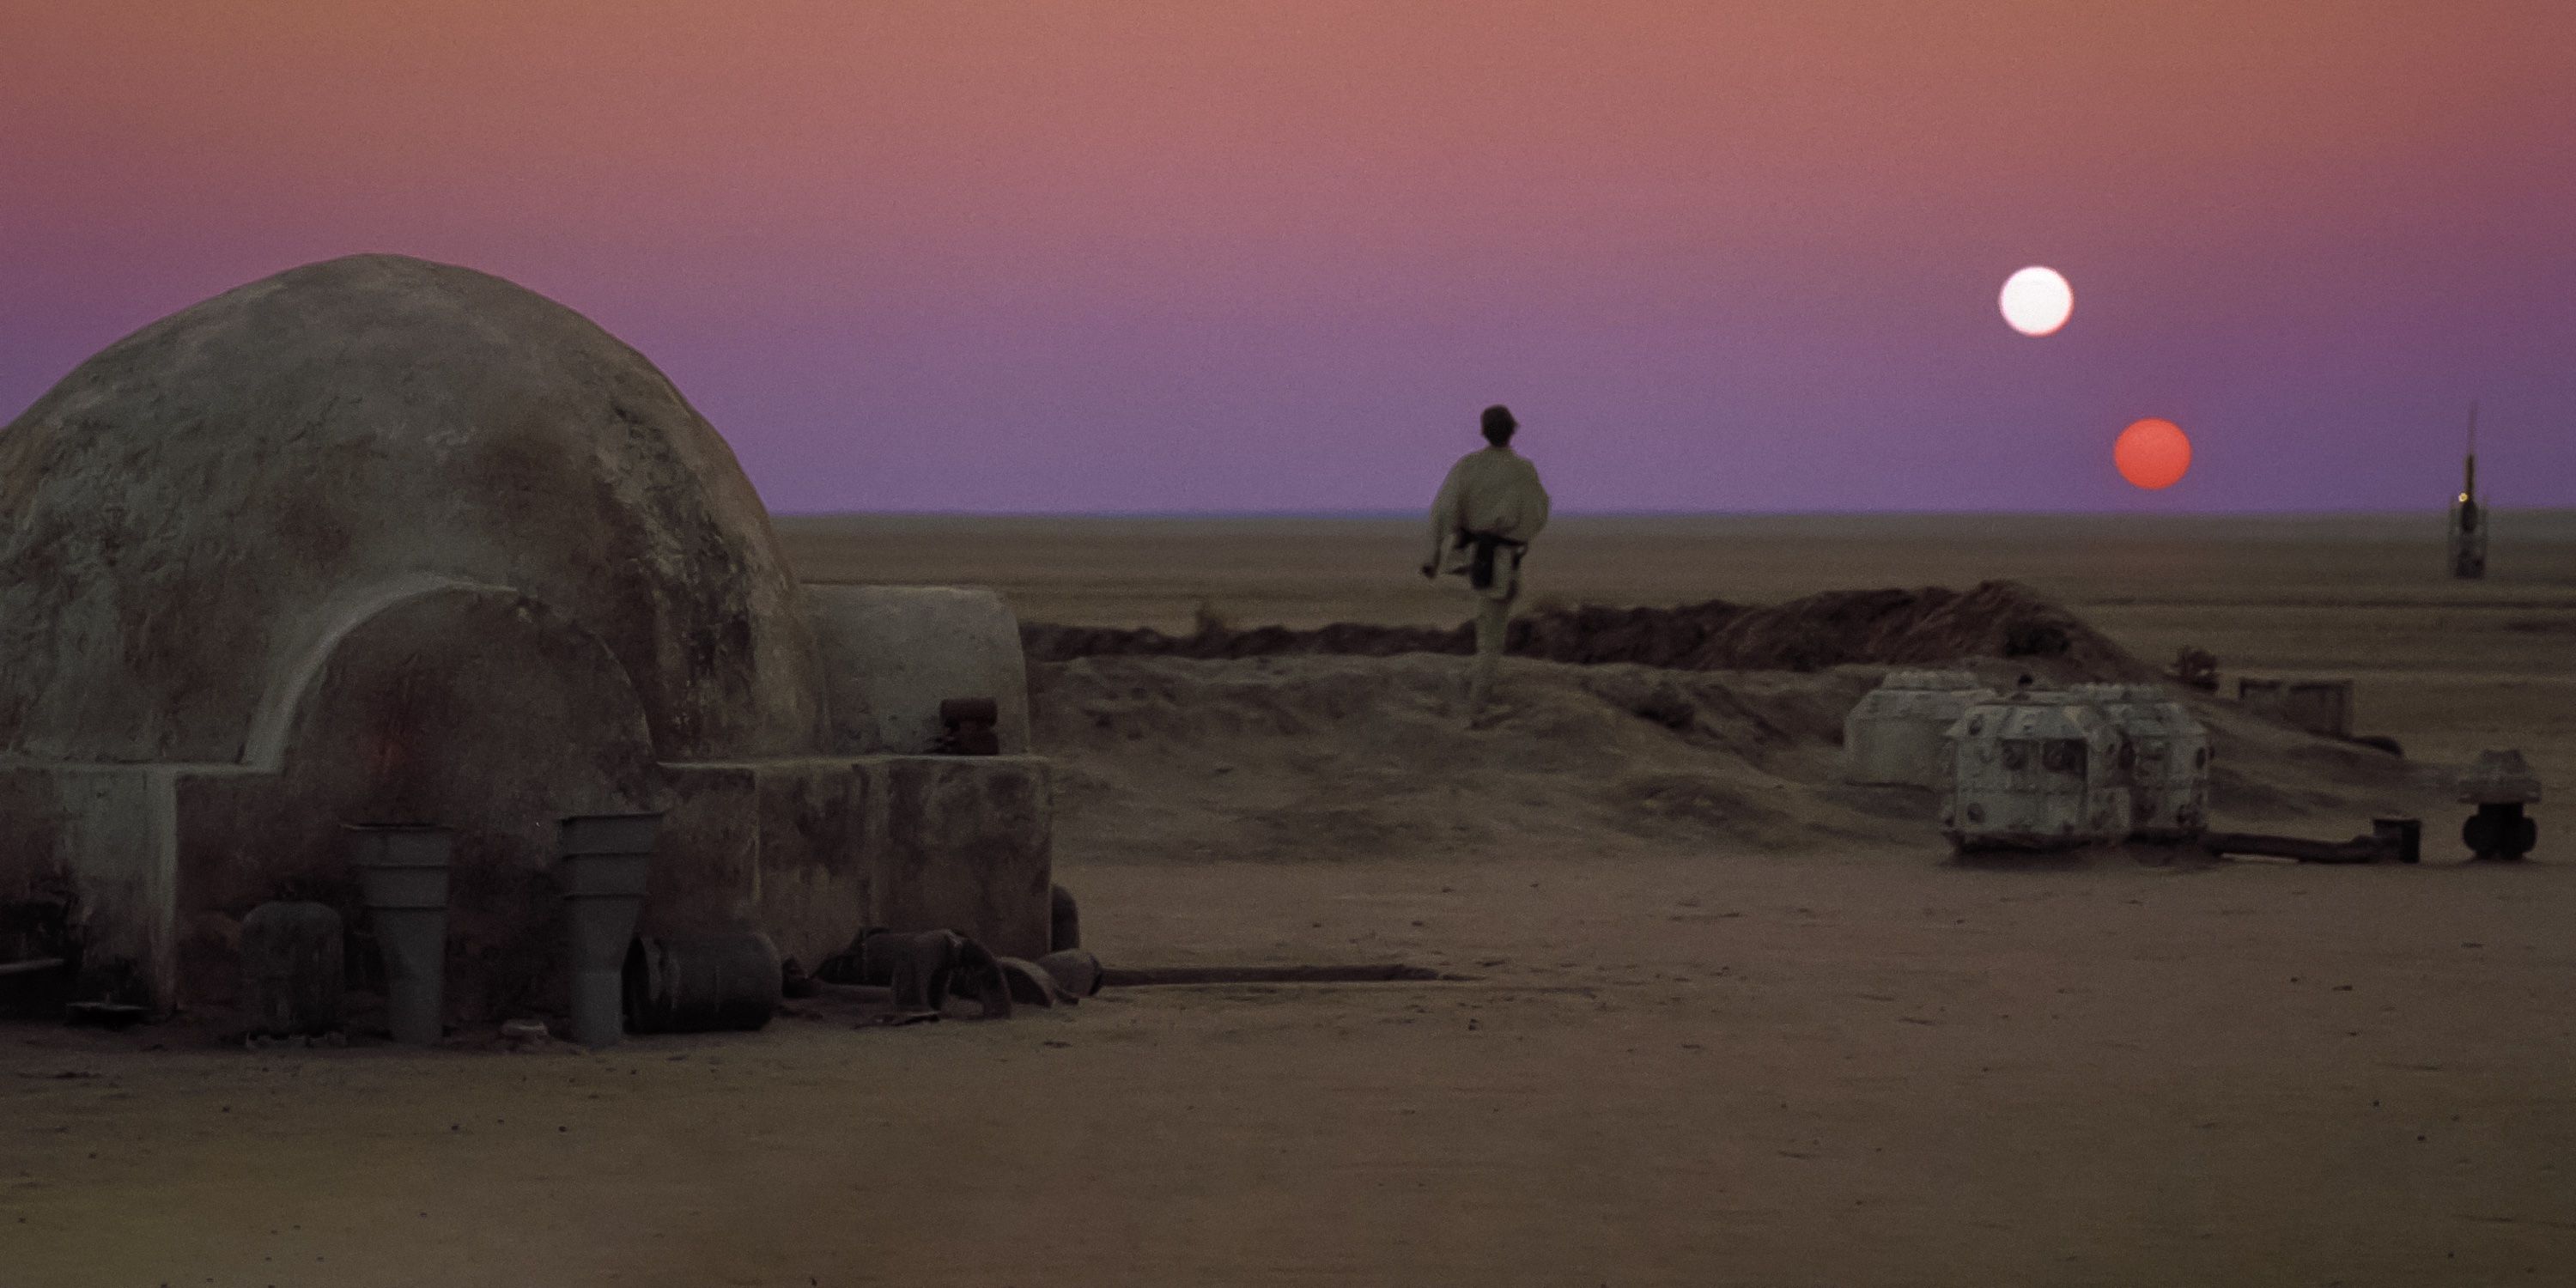 Luke Skywalker with Tatooine's sky at sunset in the background in Star Wars: A New Hope